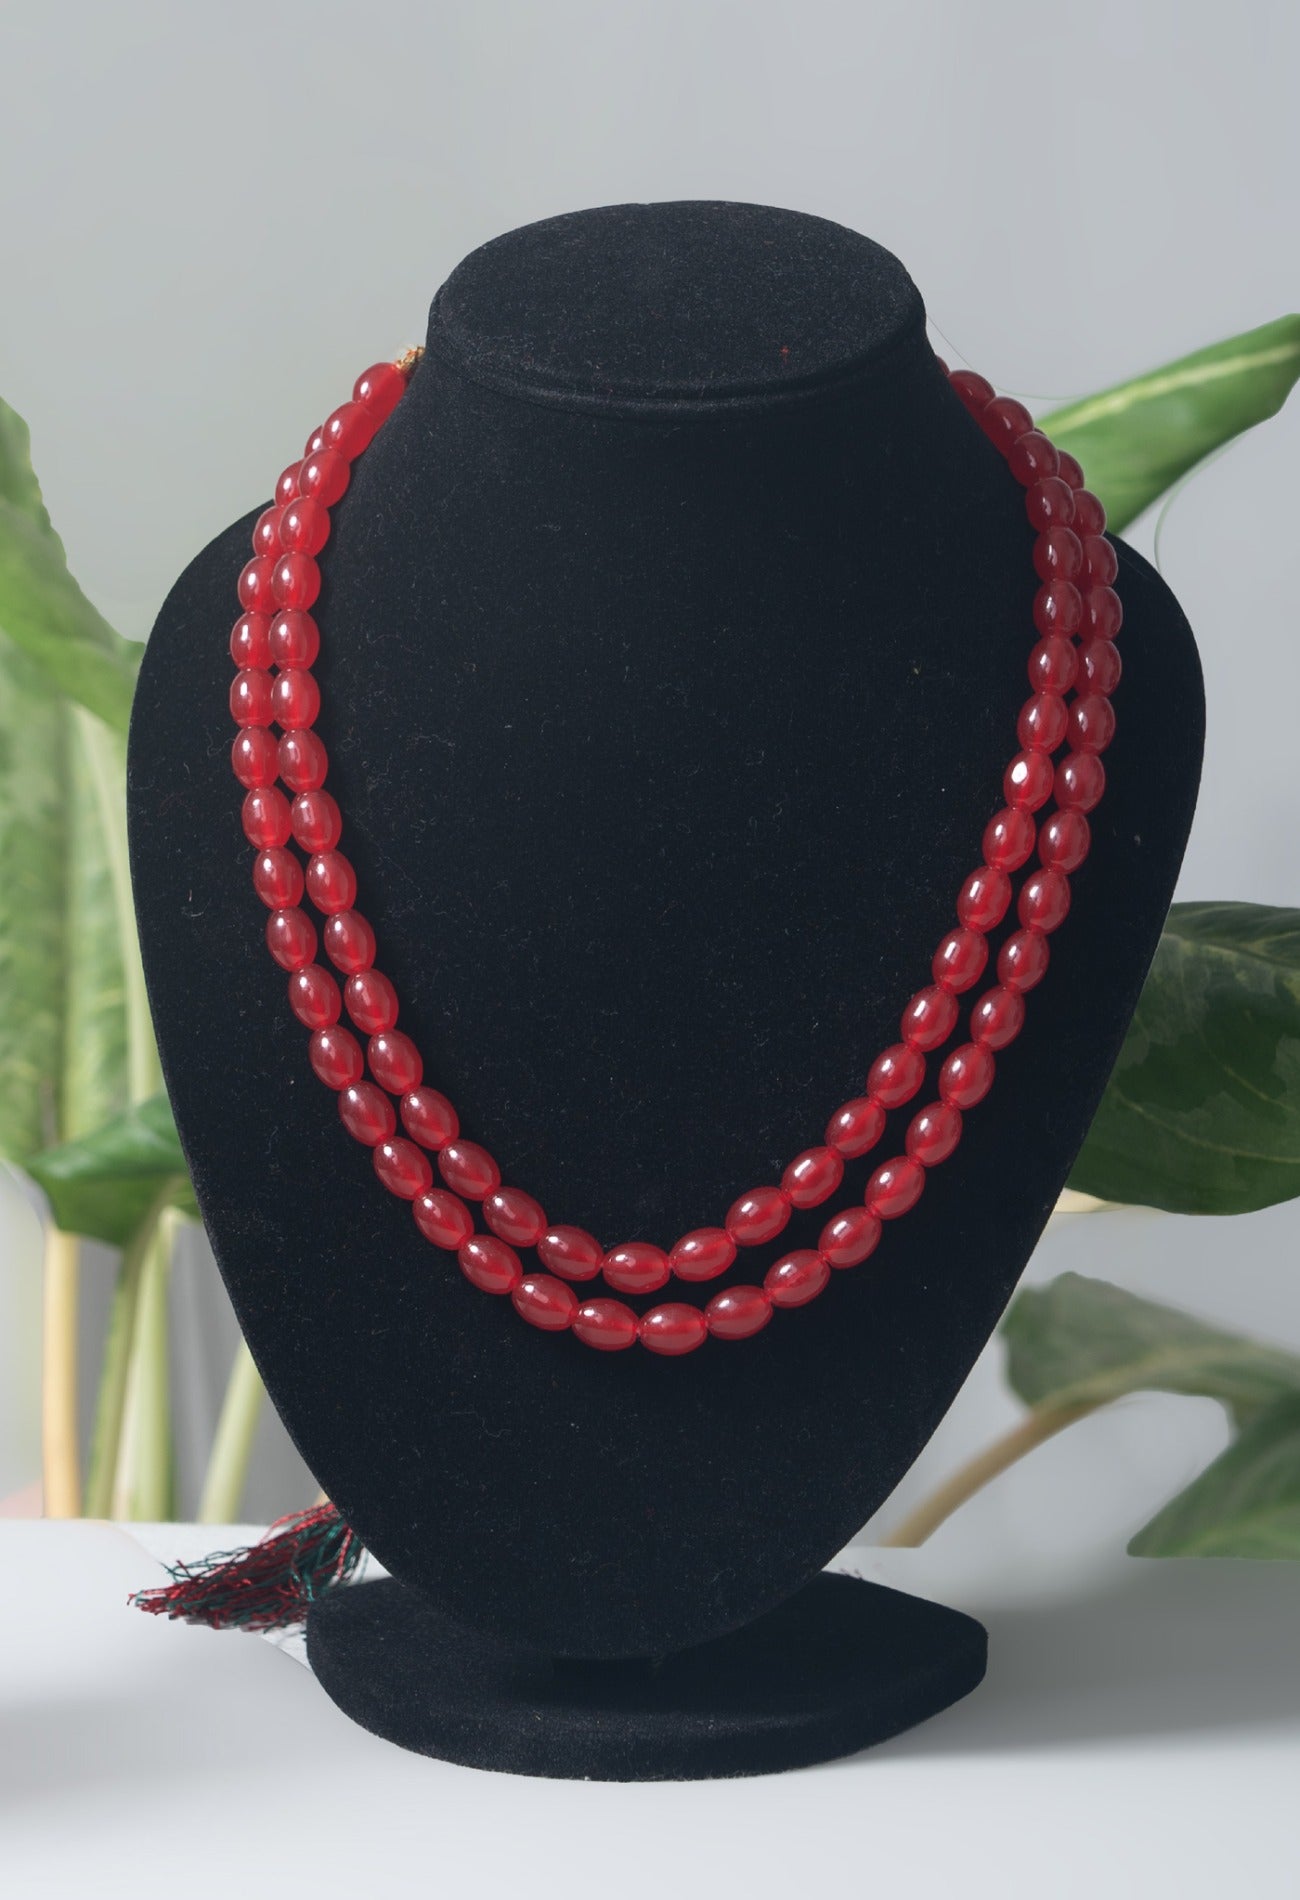 Online Shopping for Maroon Amravati Oval Beads Necklace with Pendent with jewellery from Andhra pradesh at Unnatisilks.com India
